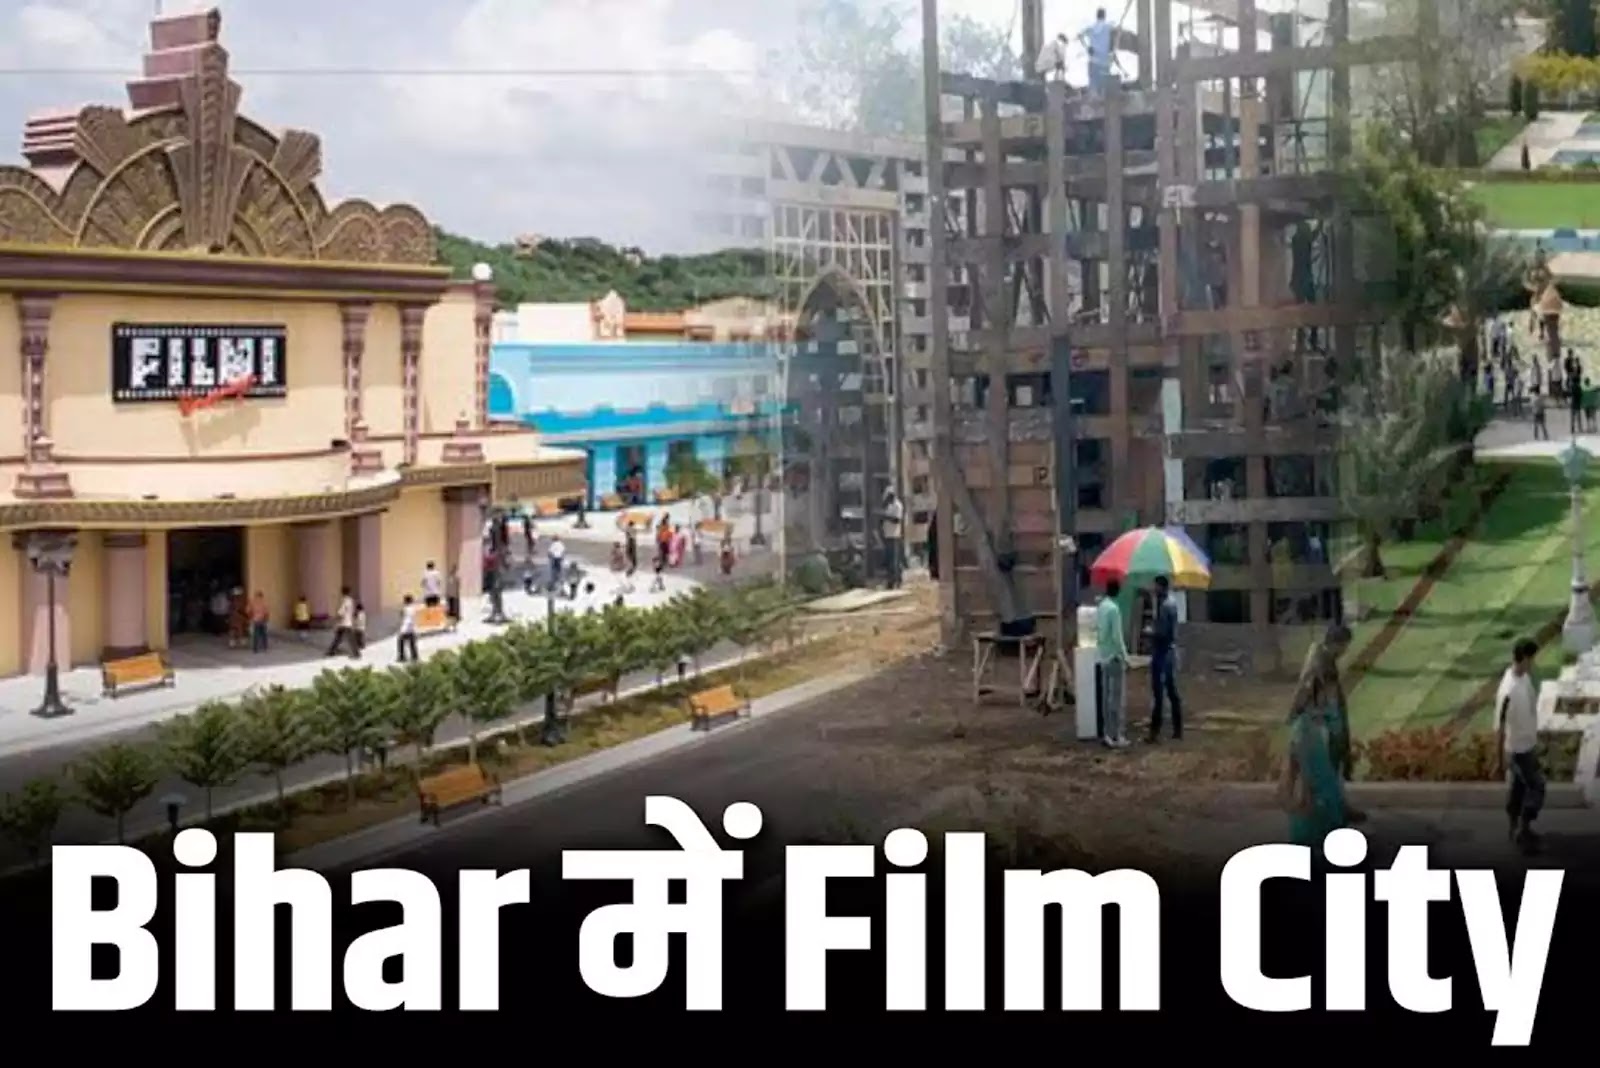 Bihar Film City: Land acquisition work completed for the construction of Film City in Bihar, Sushant Singh rajput ke nam se jana jayega, know facility